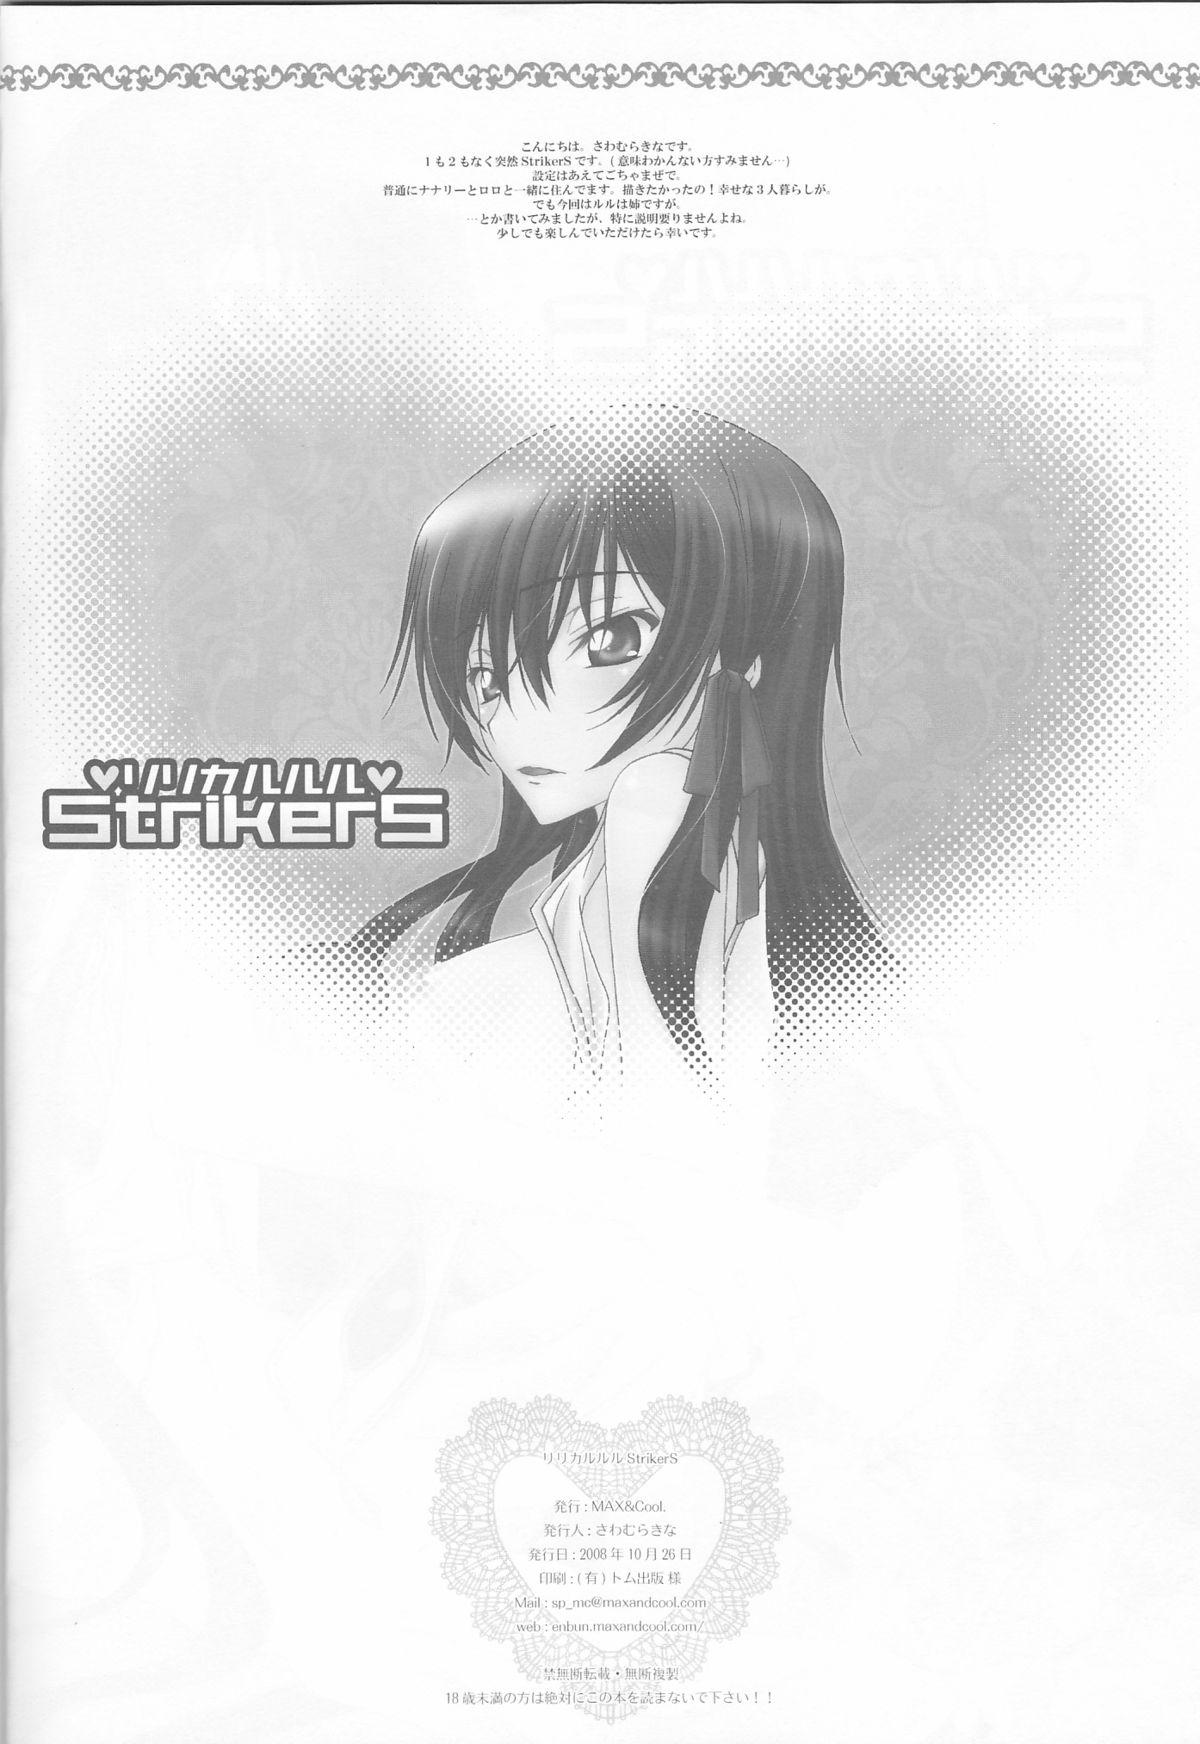 Close Lyrical Rule StrikerS - Code geass Indonesian - Page 4